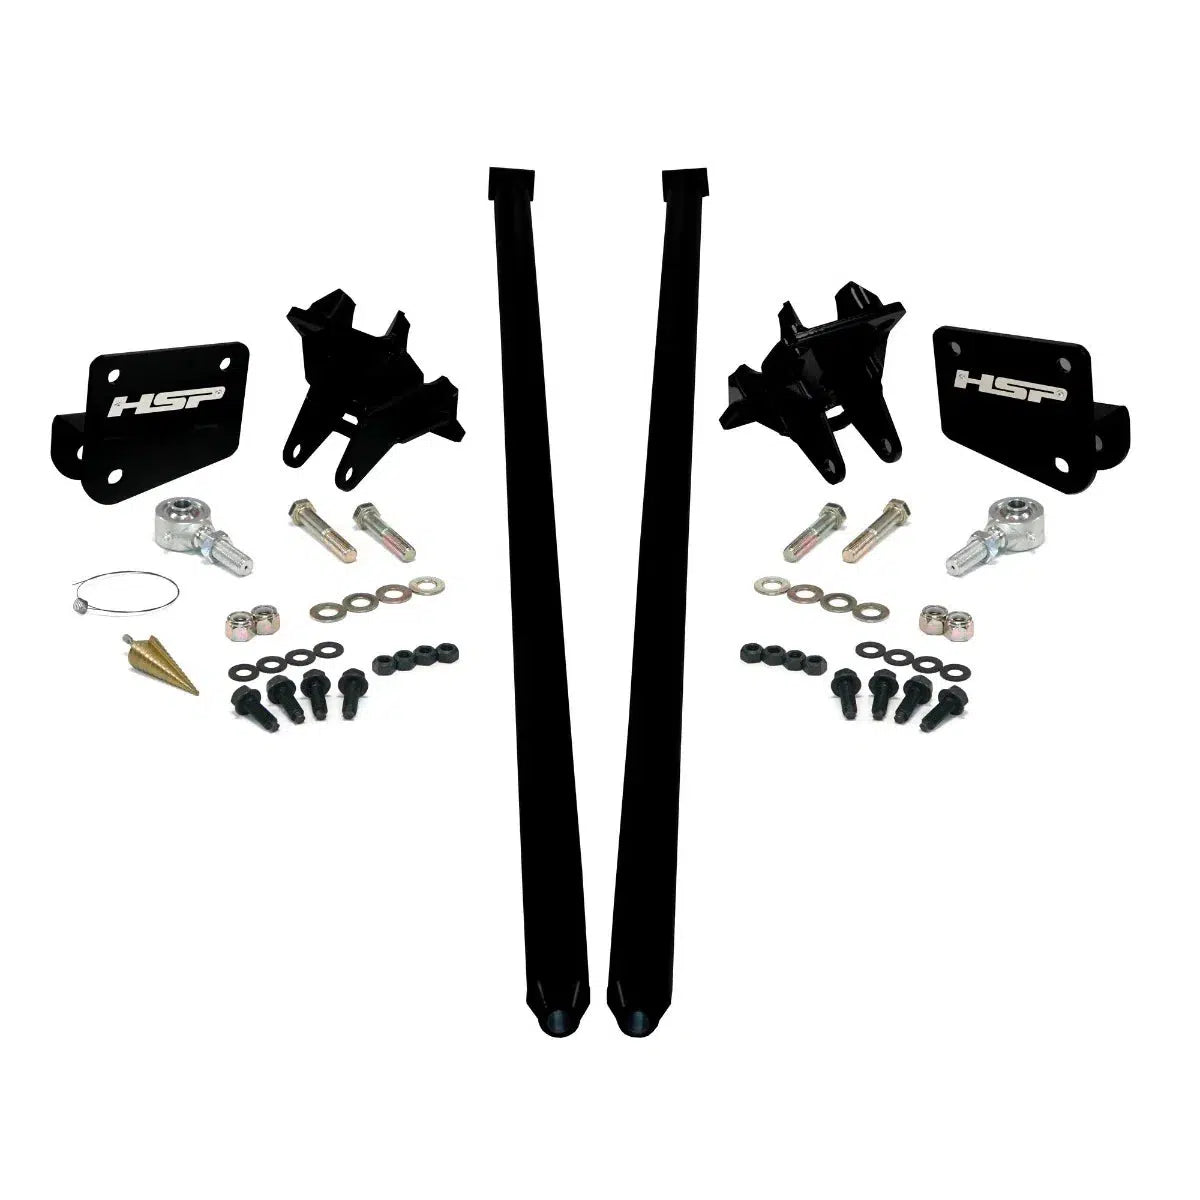 2011-2017 Powerstroke Traction Bars (ECSB) (HSP-P-435-2-2-HSP)-Traction Bars-HSP Diesel-HSP-P-435-2-2-HSP-SB-Dirty Diesel Customs